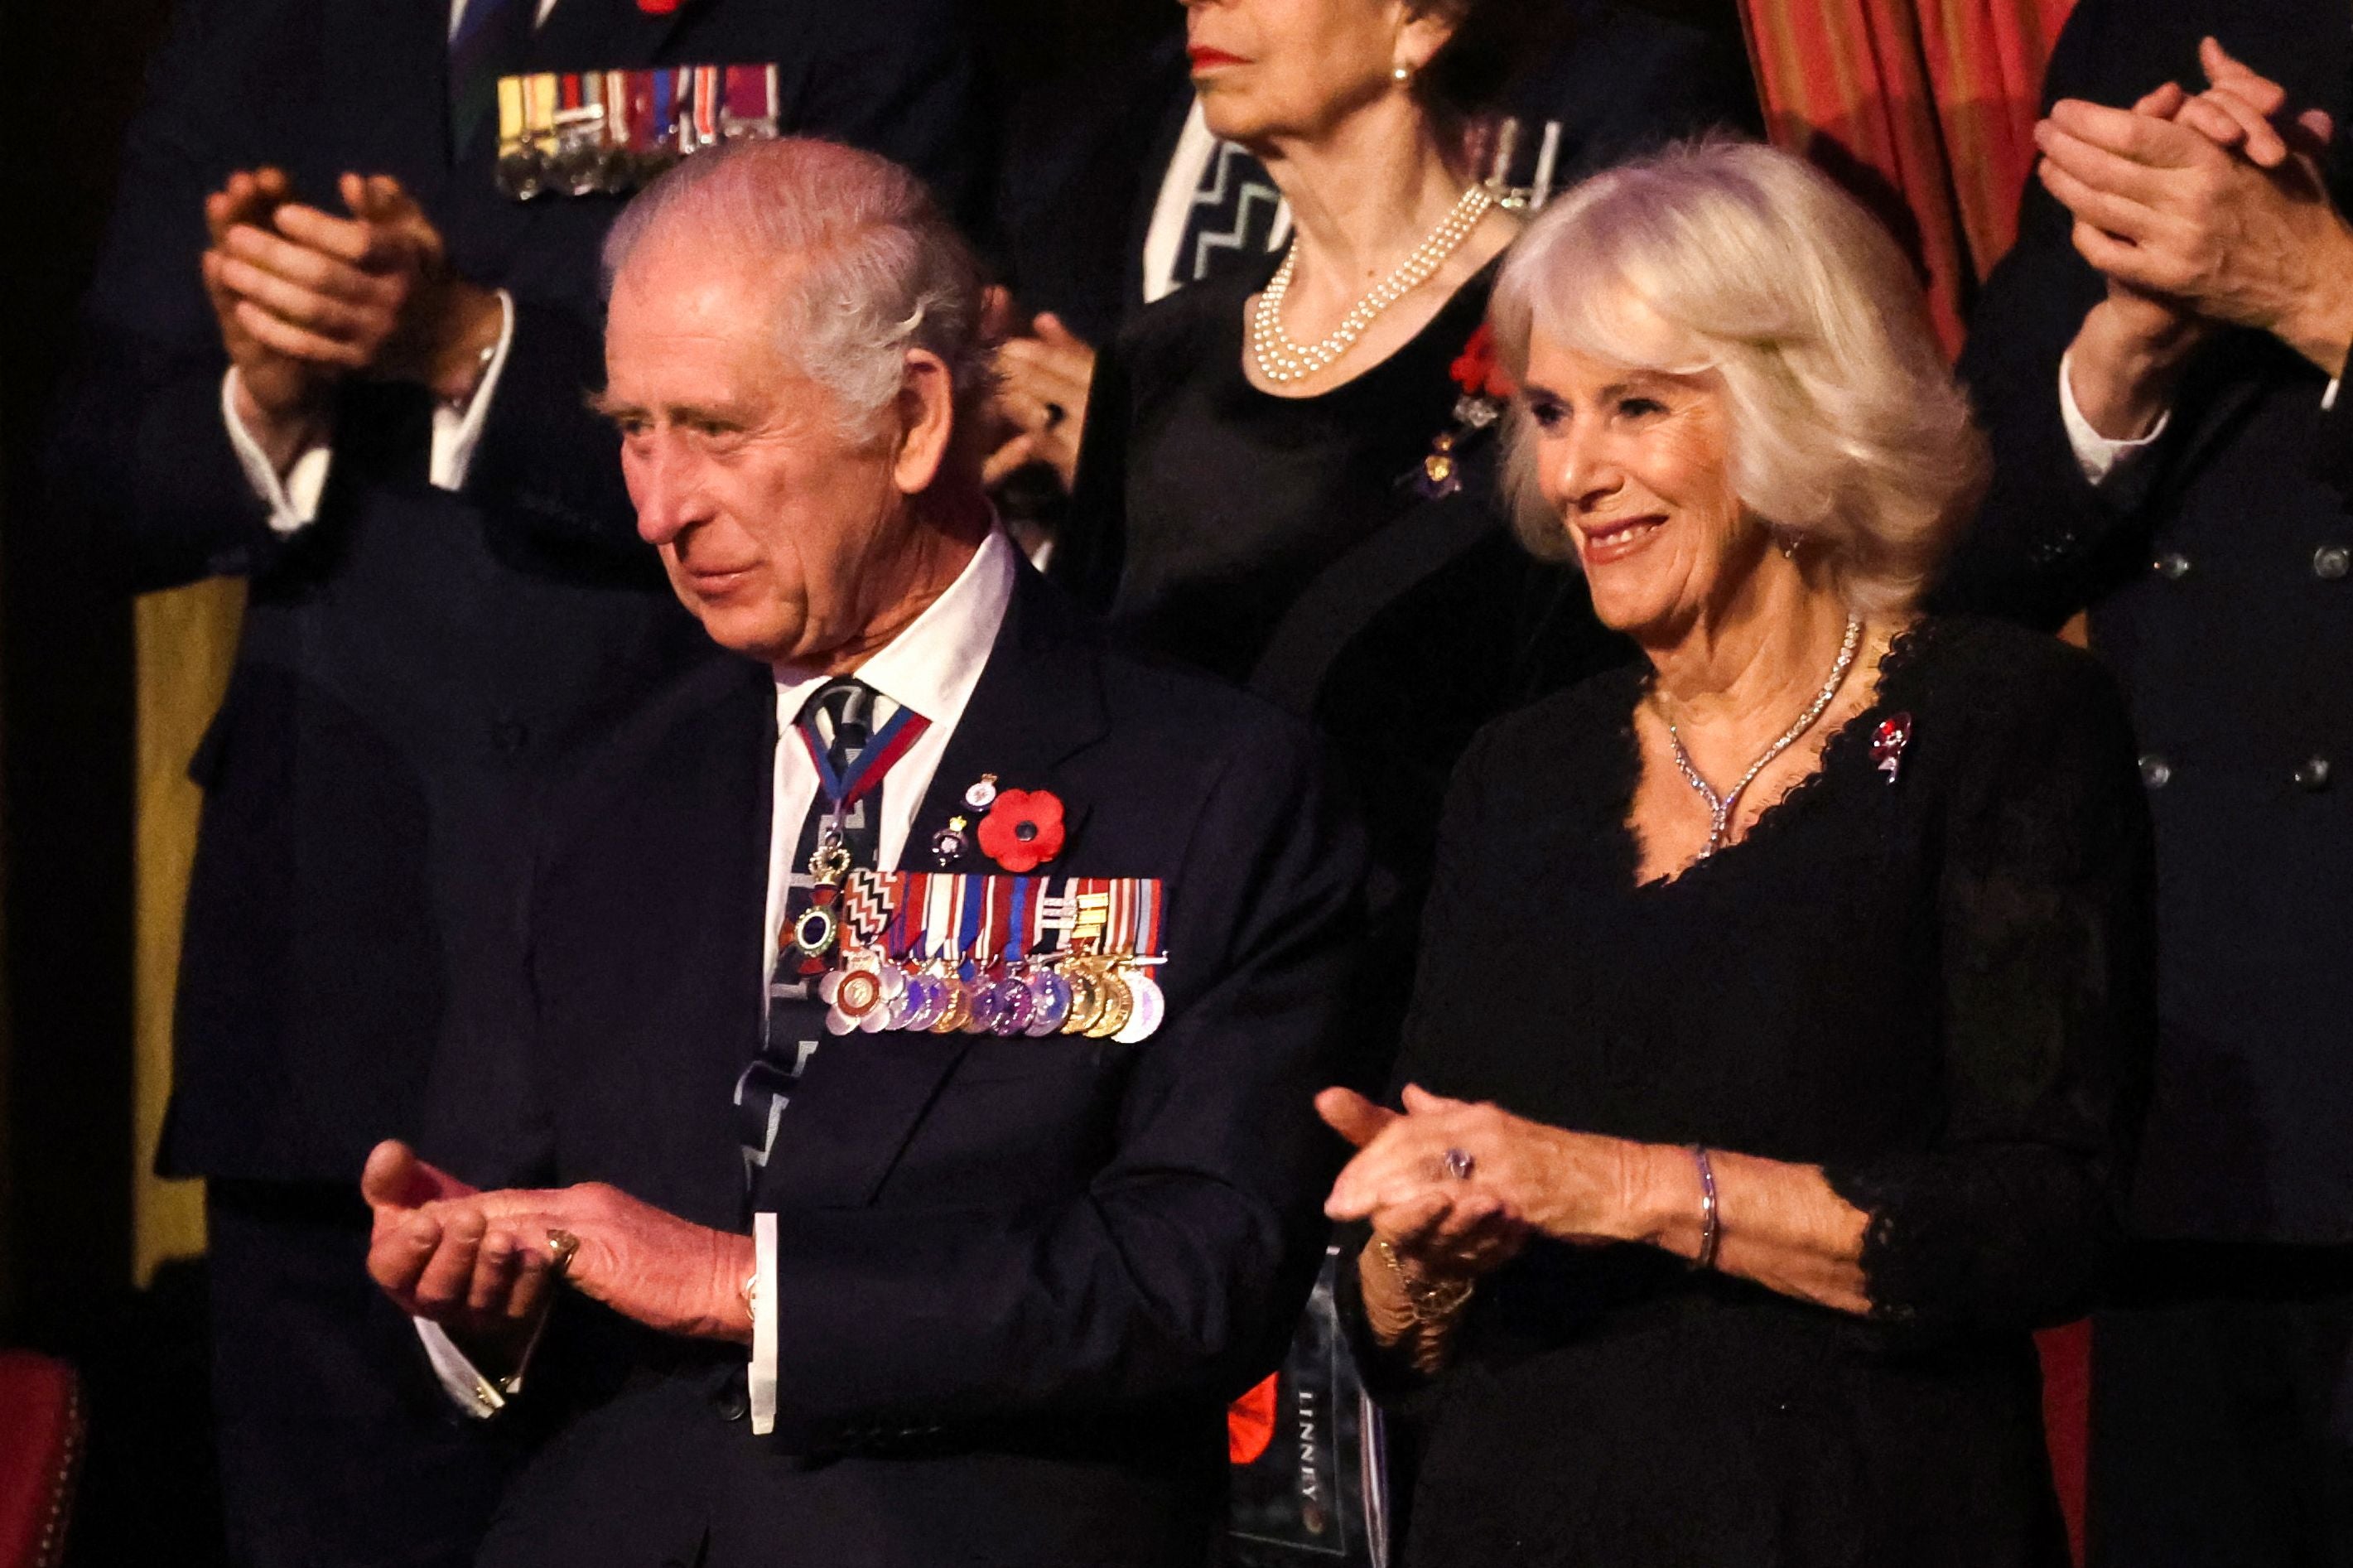 King Charles III and Queen Camilla attend “The Royal British Legion Festival of Remembrance” ceremony at Royal Albert Hall, in London, on Saturday night